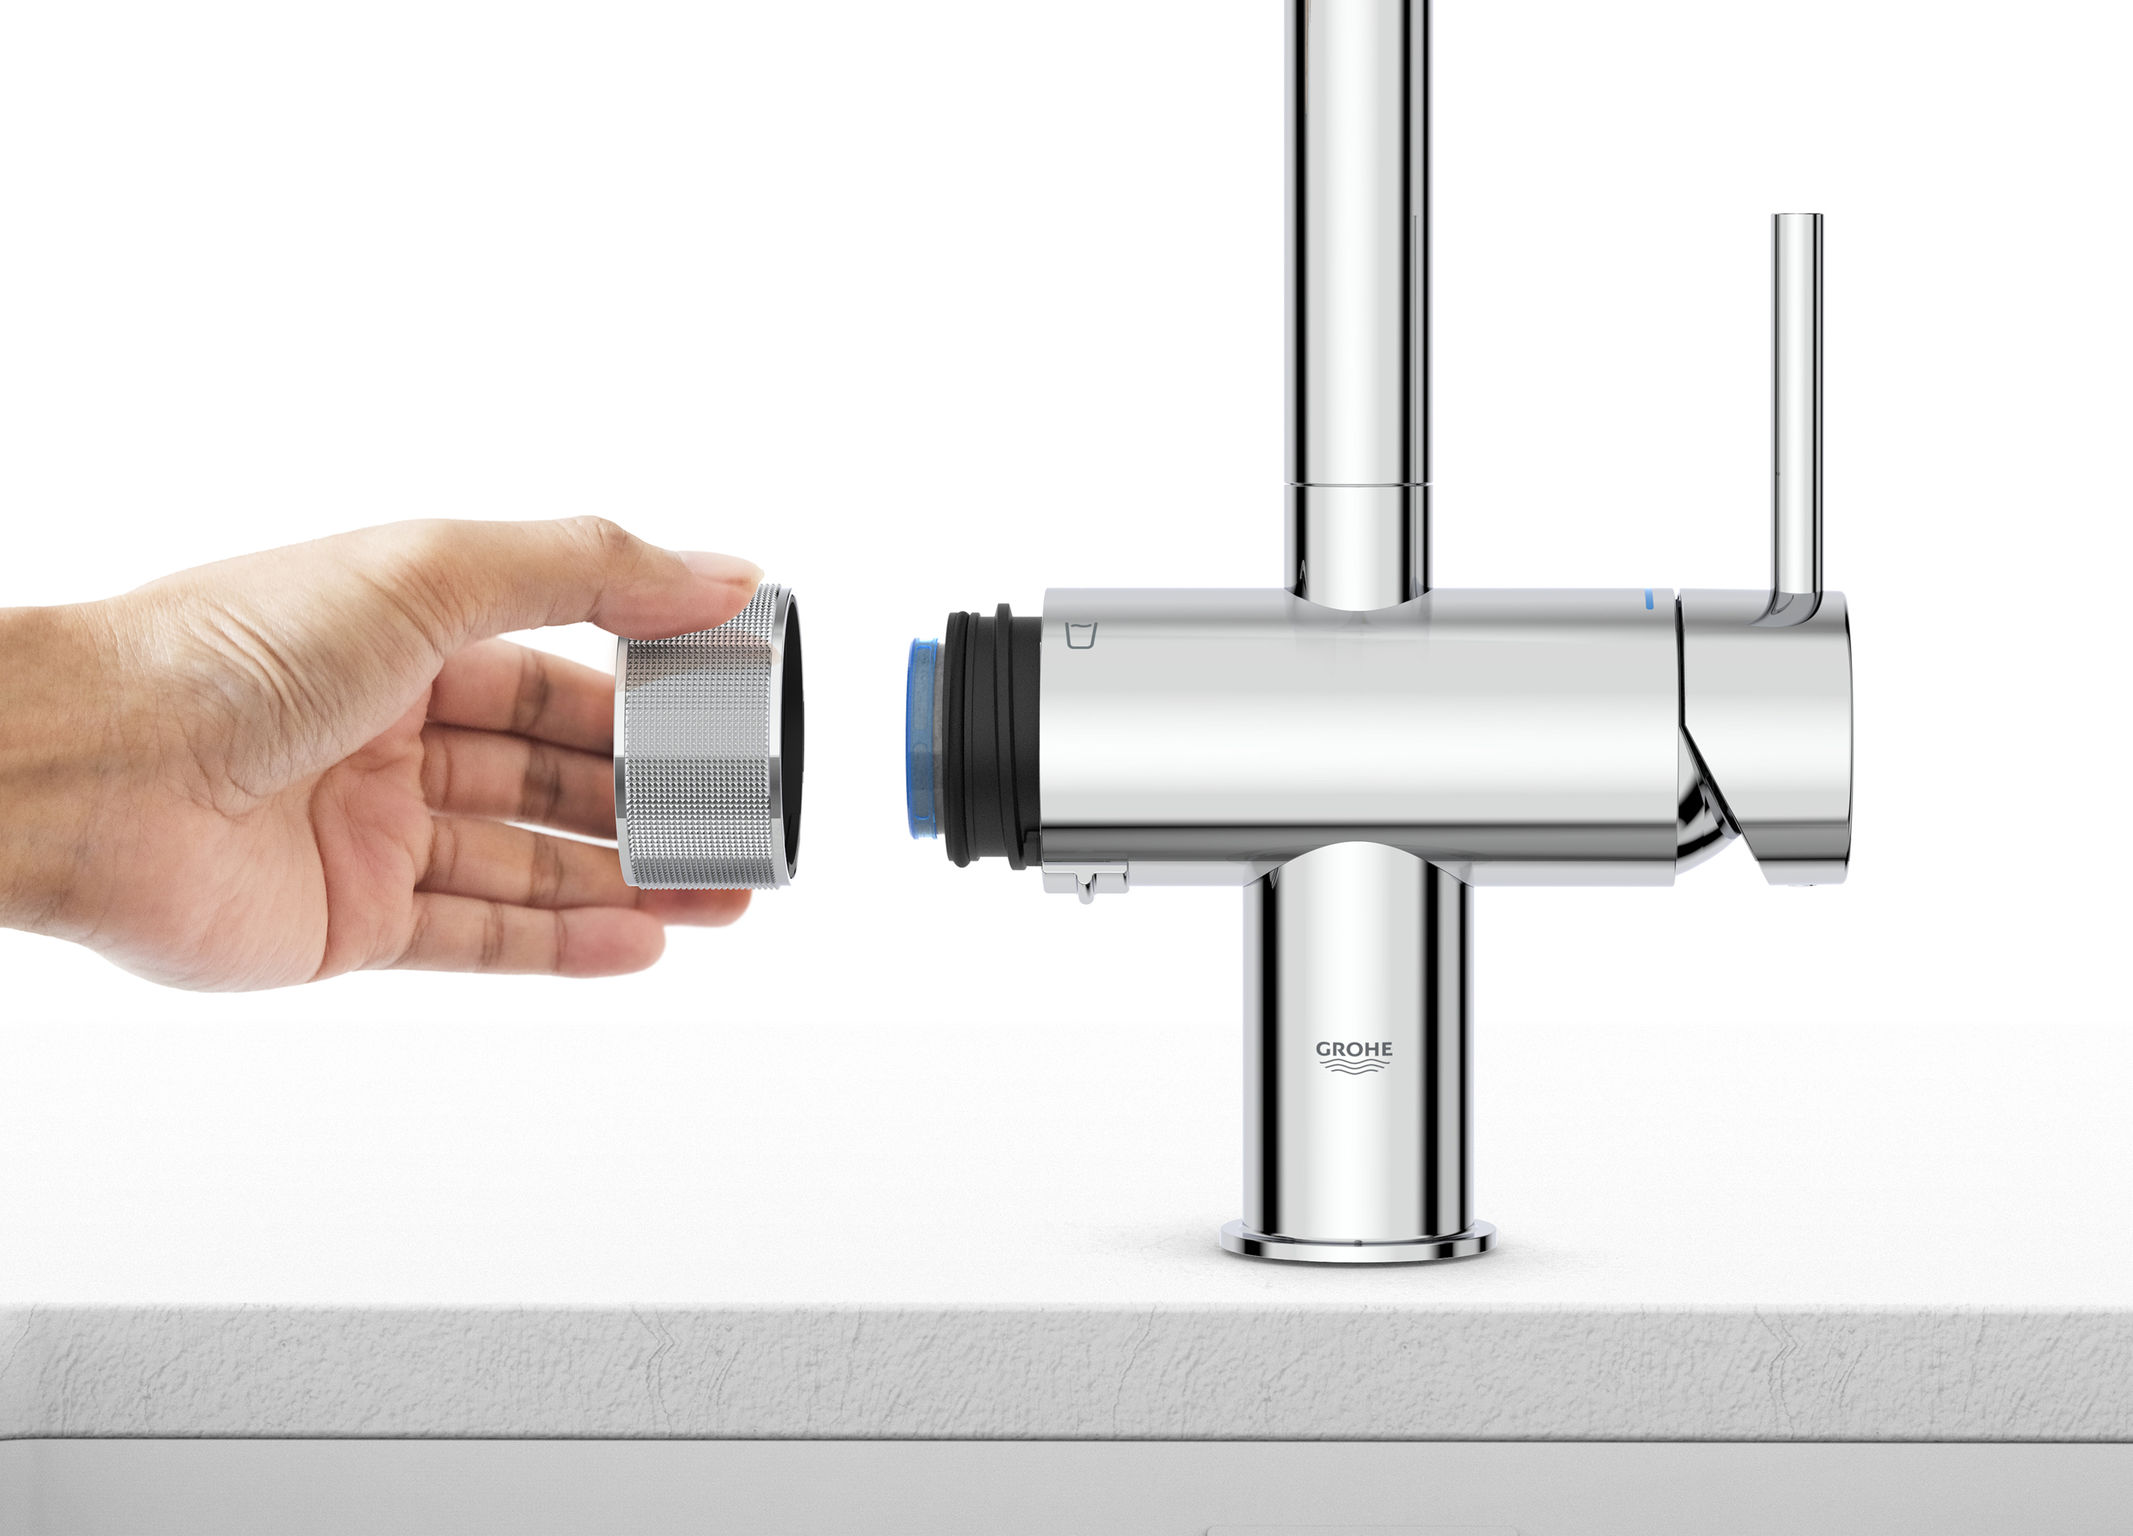 Minta Water Filter Integrated Kitchen Faucet